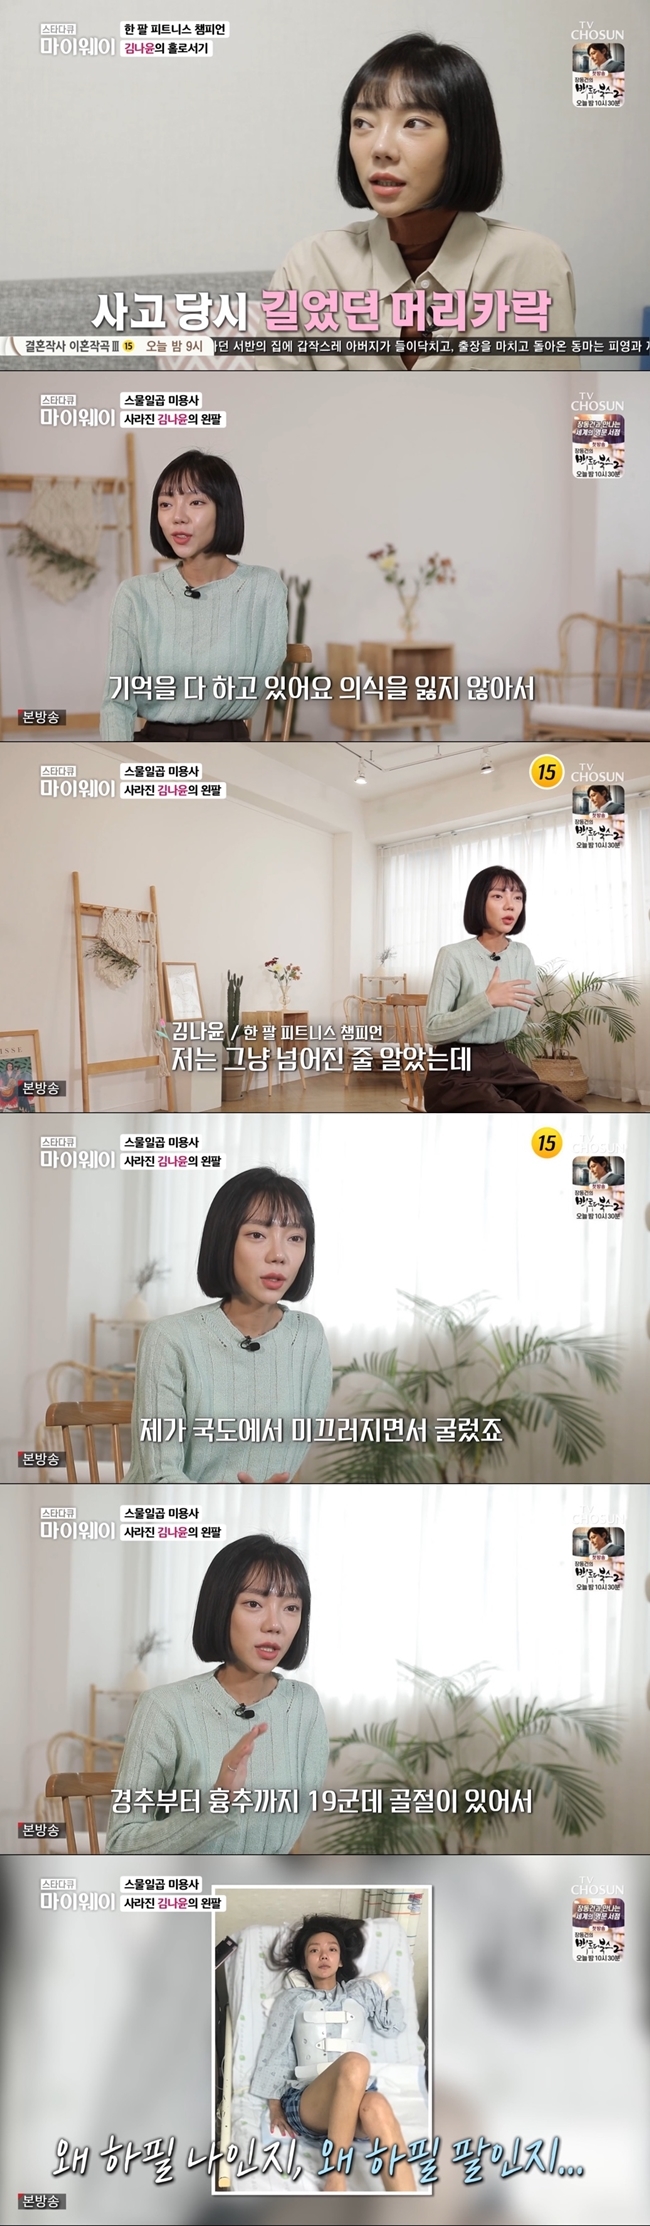 Fitness player Kim Na-yoon mentioned a traffic accident in the past.On March 20th, TV Chosun star documentary myway, a fitness player Kim Na-yoons daily life was revealed.Kim Na-yoon, who worked as a hair designer before the accident, said, I started my career at the age of 17. I lived with my work as a top priority.I remember everything because I didnt lose my memory at the time of the accident. It was the first heat wave. It was hot and hot.I paid a monthly rent to the company and left for Chuncheon with a light heart because I was not long on vacation or vacation due to the nature of my job, and I left for Chuncheon.I was going and I slipped on the national highway and rolled, he recalled.I thought I just fell, but I could not get up. Friend came and cried because I had no arms. I wanted to hear it wrong.I felt like I didnt have a real arm, and I couldnt move, because my arm was amputated and I was blown away, and I couldnt get up because I had 19 fractures from the cervical vertebrae to the thoracic vertebrae.I asked Friend to find my arm because I thought I could not rot enough to join, and Friend came to me. I went to the emergency room in the neighborhood. I was told that there was a difficulty in operating because my arm was too damaged, but I was able to do it because of sepsis.For a hairdresser, the left hand is a very important role: most of the time, the pilot and angle are controlled by the left hand, and my goals, dreams, and all that I have done have been lost.I cried a lot. If Sudan was not a motorcycle, I would have had an accident. Whose fault was it?I didnt think it would be the right answer to not think about it. If Id been grateful, Id have died instantly.I was right-handed, but my left arm was cut off, so I was grateful. 